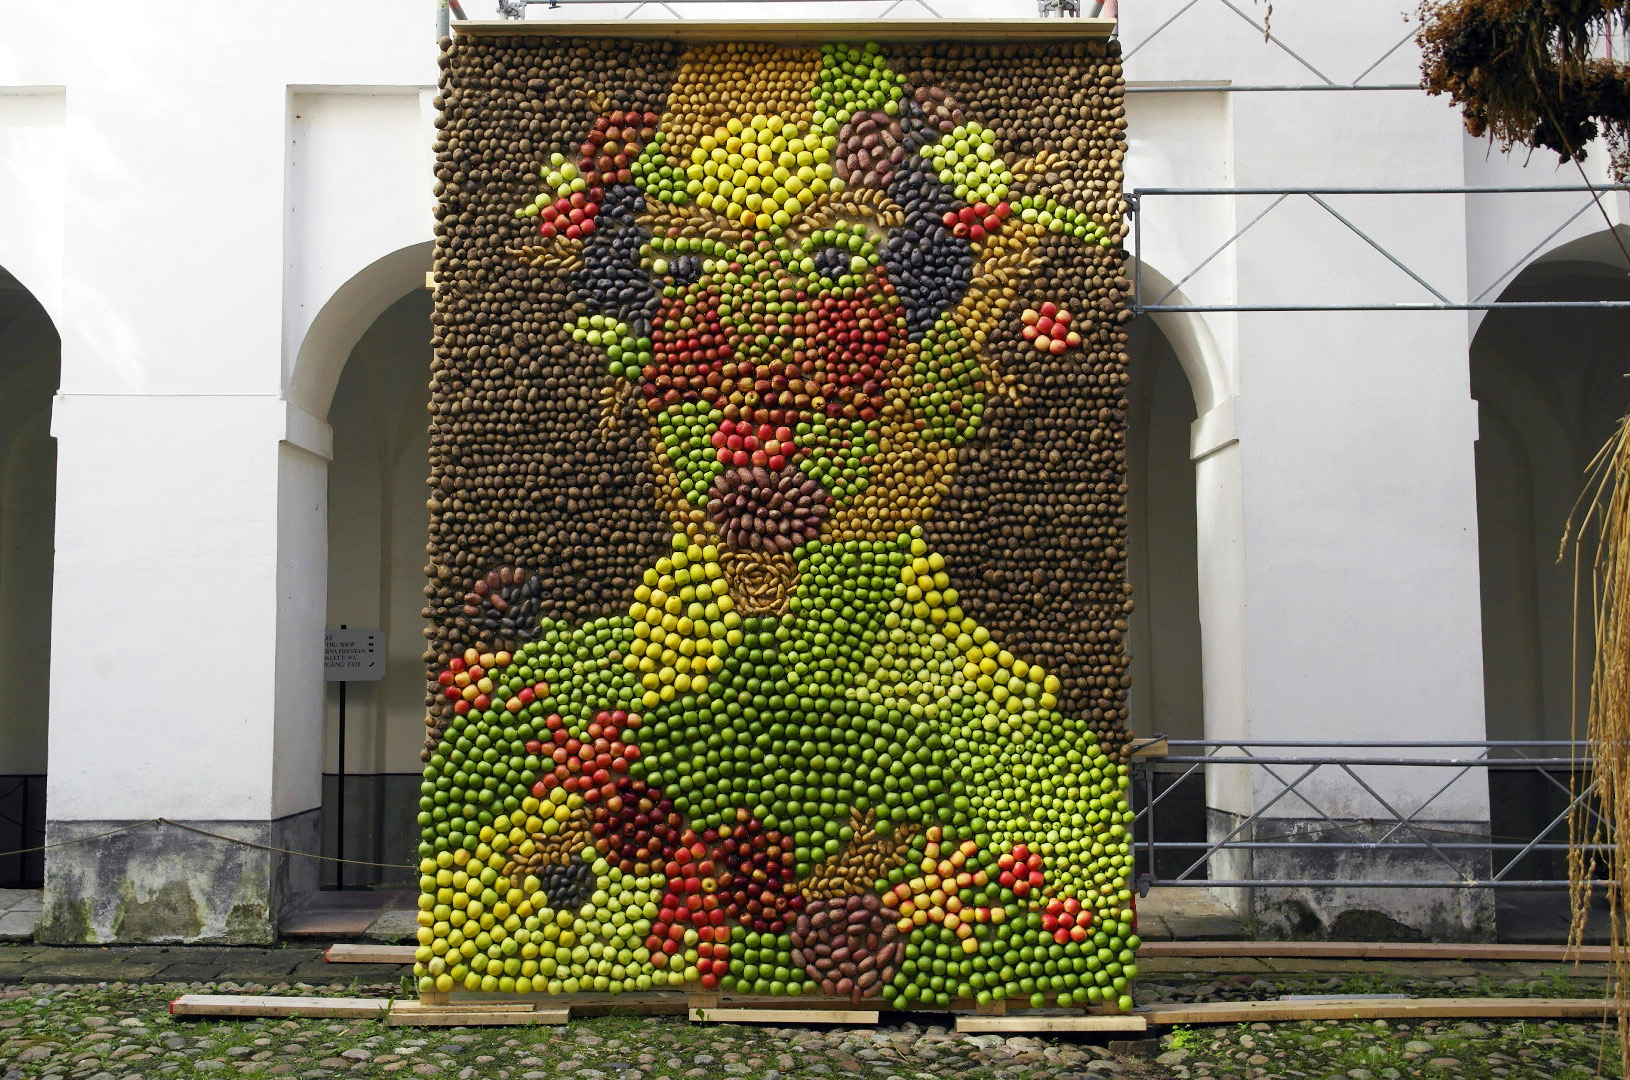  Large image depicting a male figure made of potatoes and apples in different colors